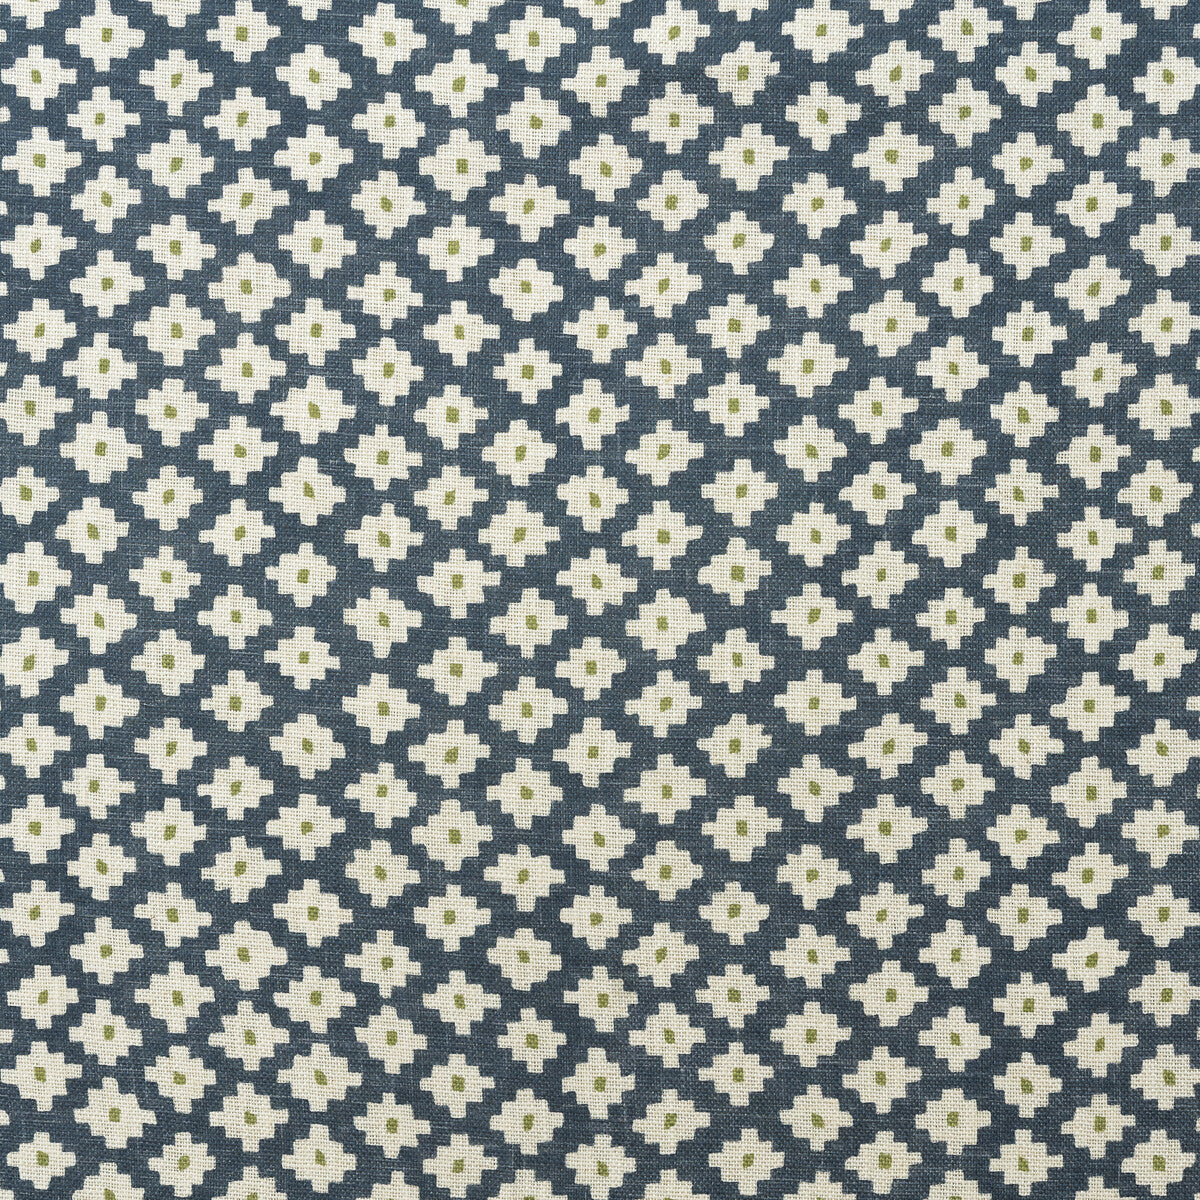 Maze fabric in denim color - pattern AM100381.50.0 - by Kravet Couture in the Andrew Martin Garden Path collection